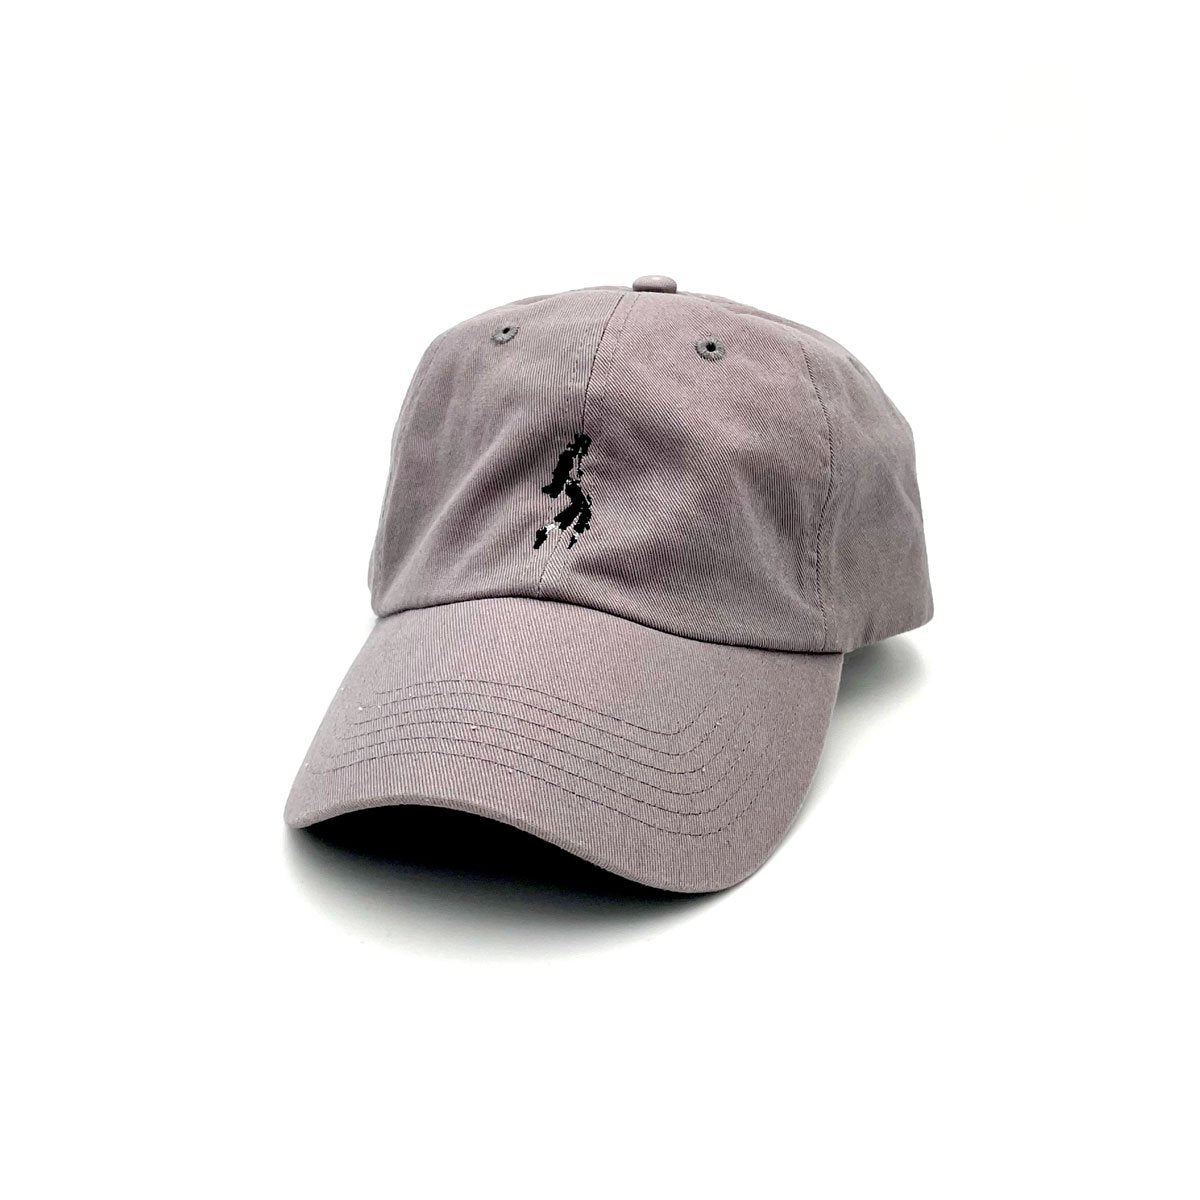 MJ THE MUSICAL Icon Cap - Grey